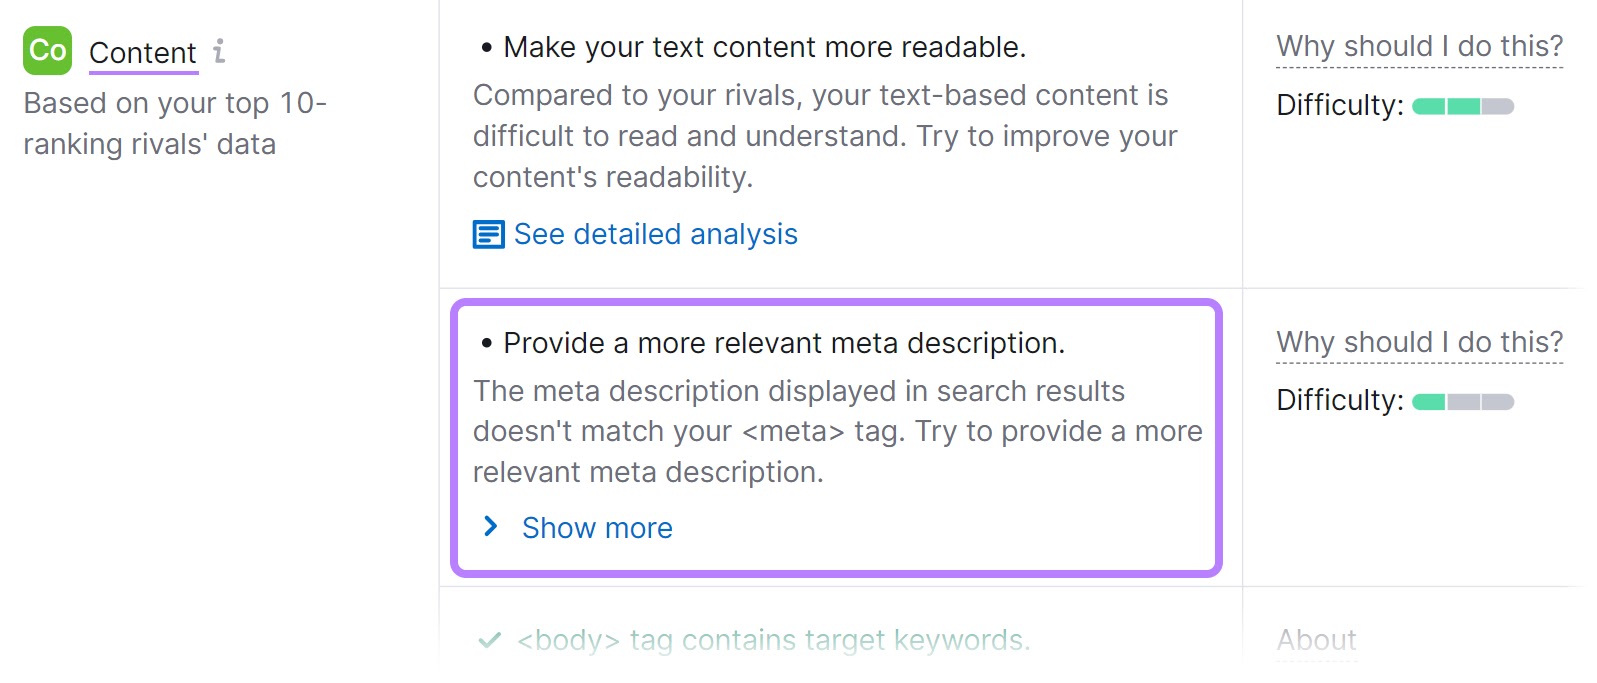 “Provide a more relevant meta description" recommendation highlighted